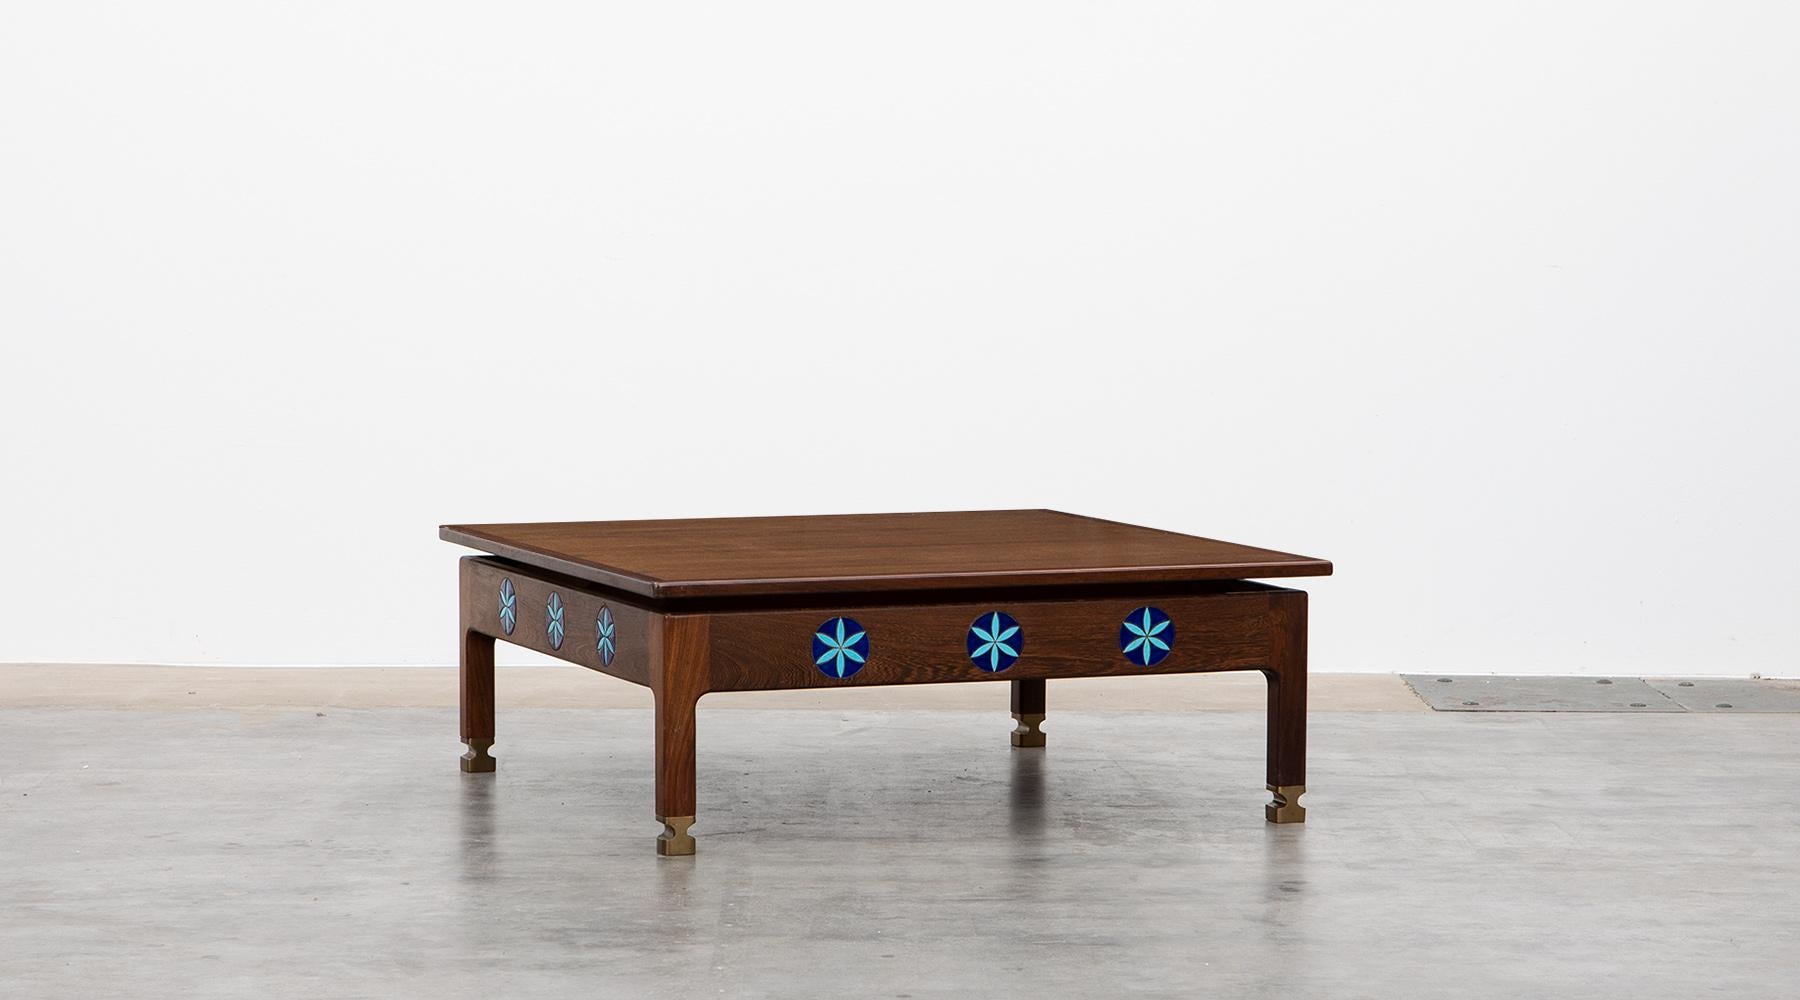 Coffeetable, by Ib Kodod Larsen.

Coffee table in designed by famous Dane Ib Kofod-Larsen. The table features enameled copper emblems and stands on solid feet in beautiful rosewood. Manufactured by Christian Linneberg Mobelfabrik. The benchmark in